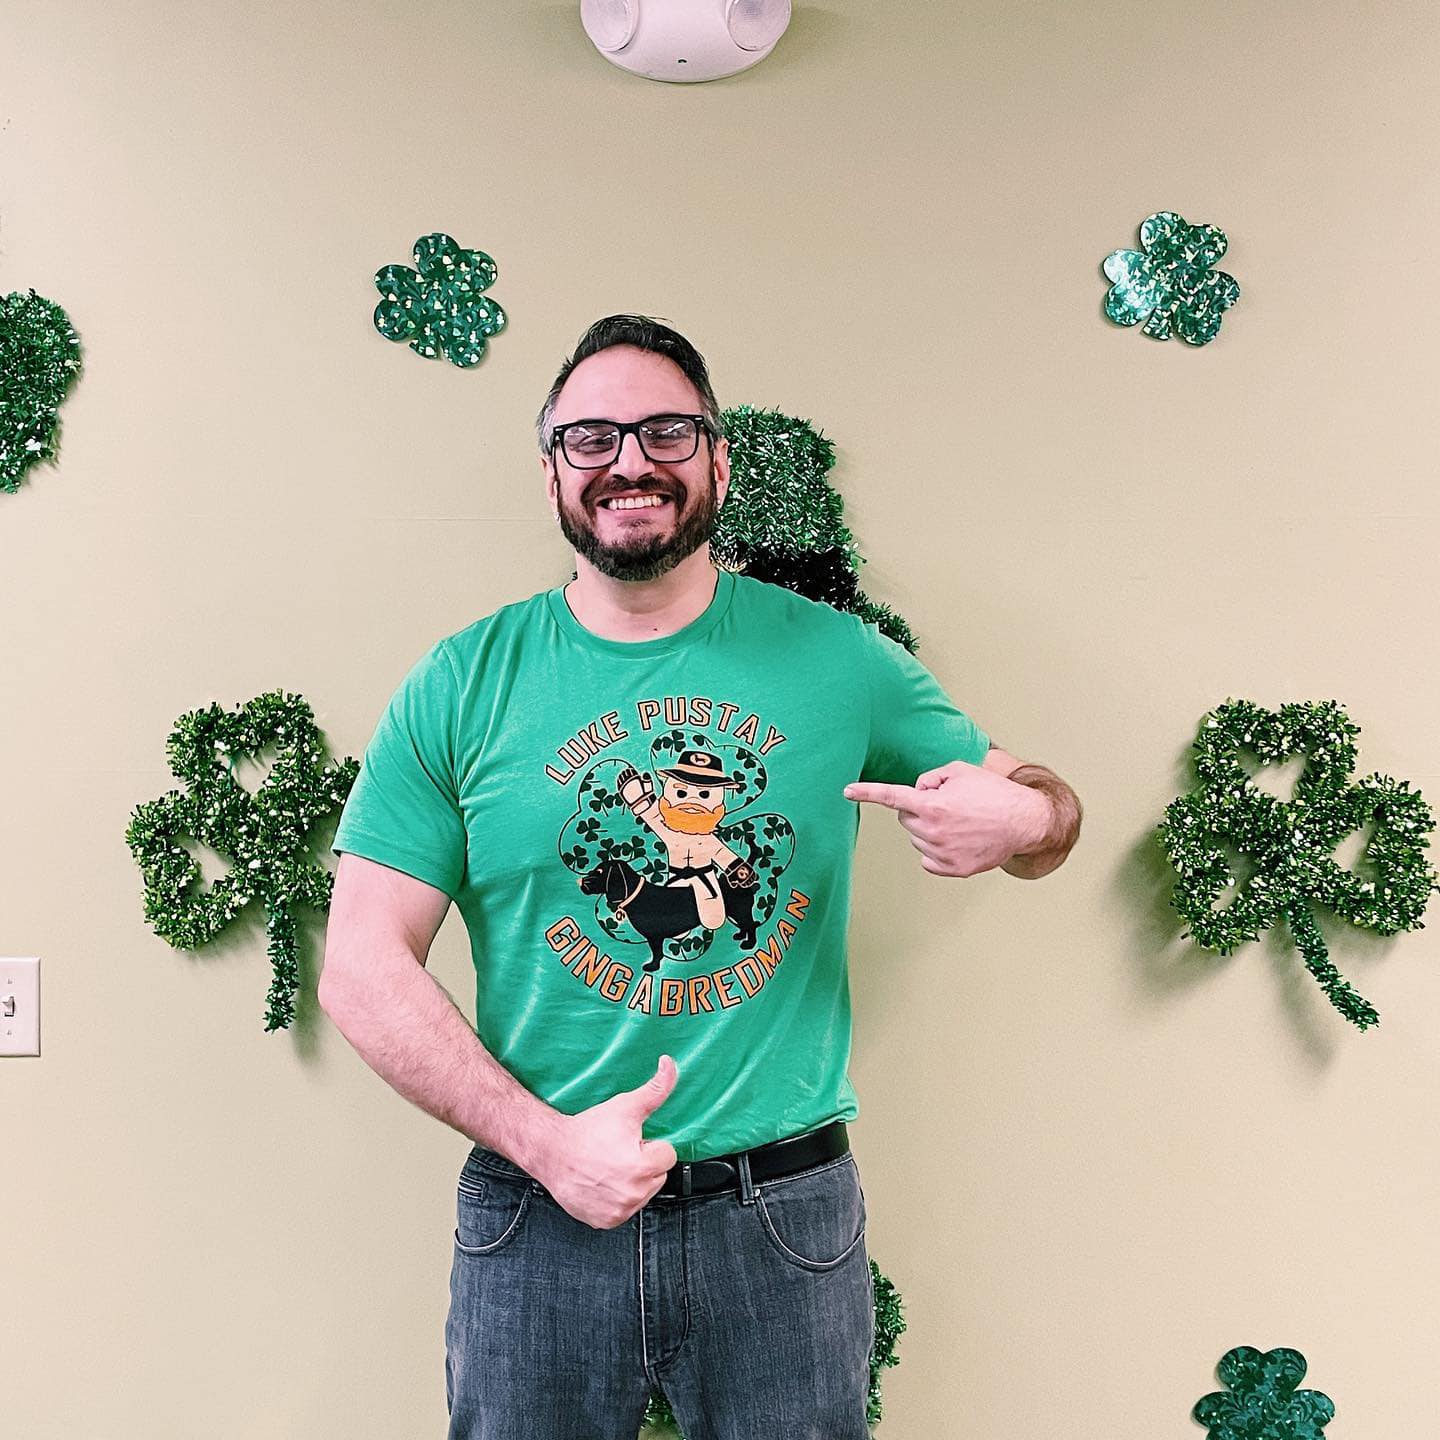 ActivEngage team member with a St Patricks day shirt